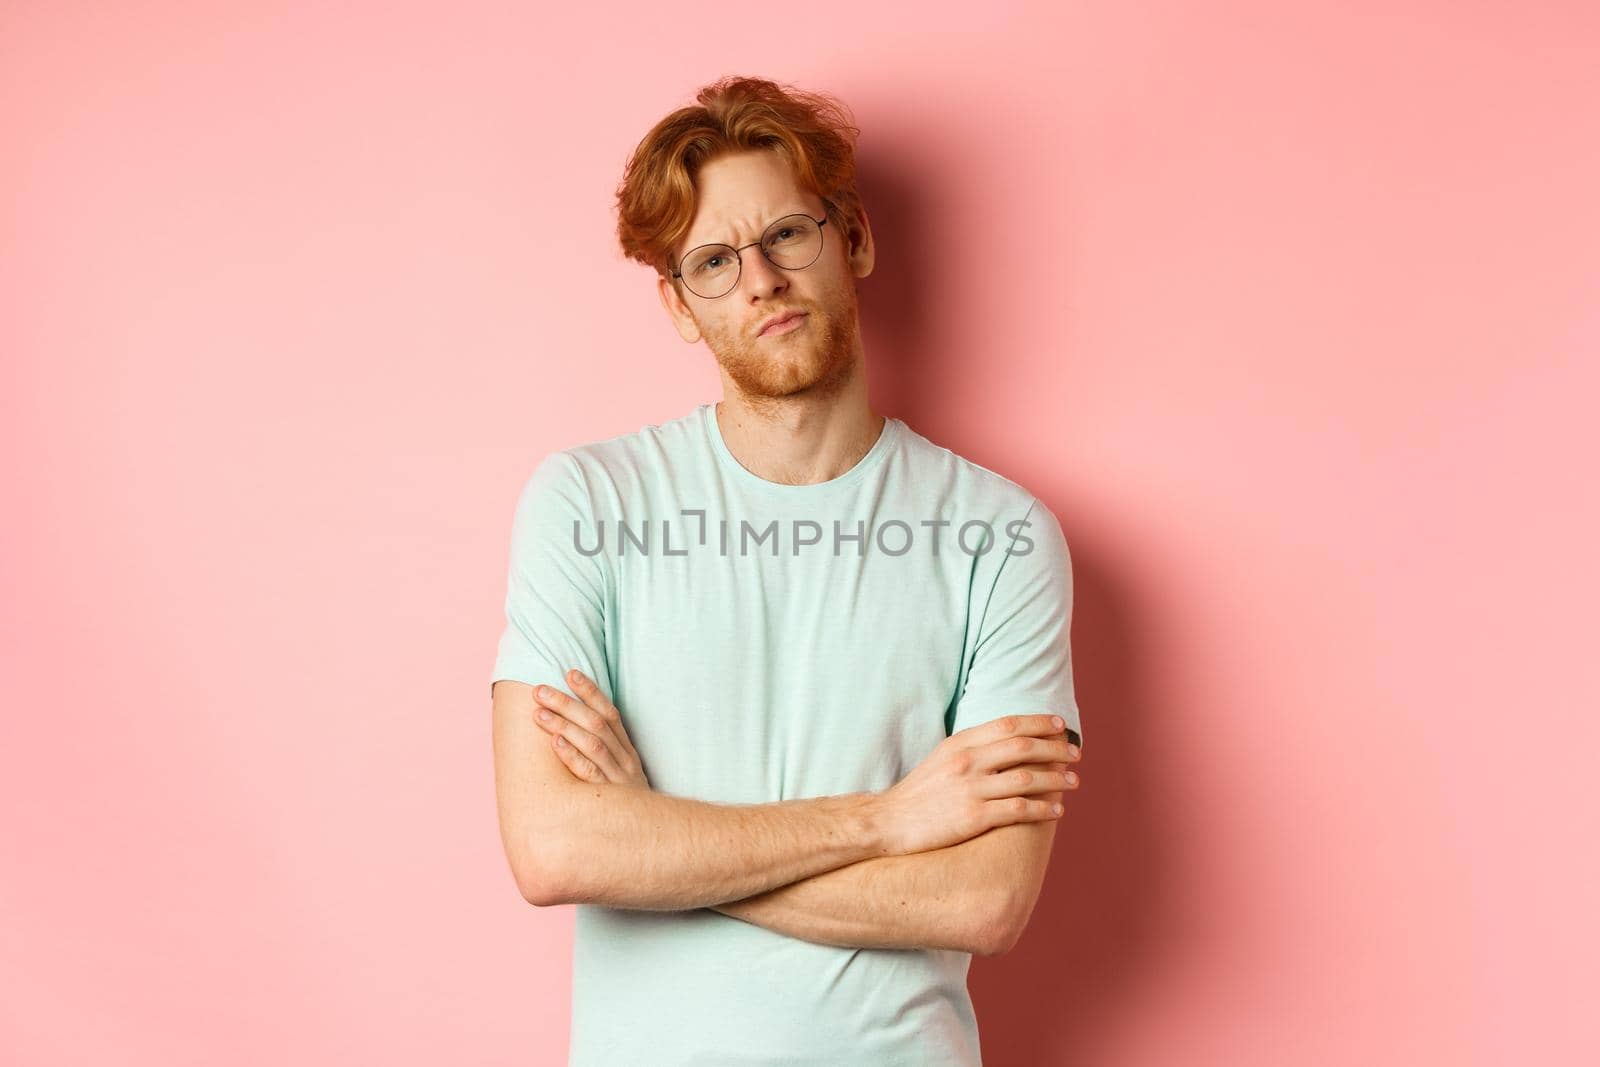 Young man with red hair and beard, wearing glasses and t-shirt, cross arms on chest, frowning while staring with skeptical and doubtful expression, standing over pink background.